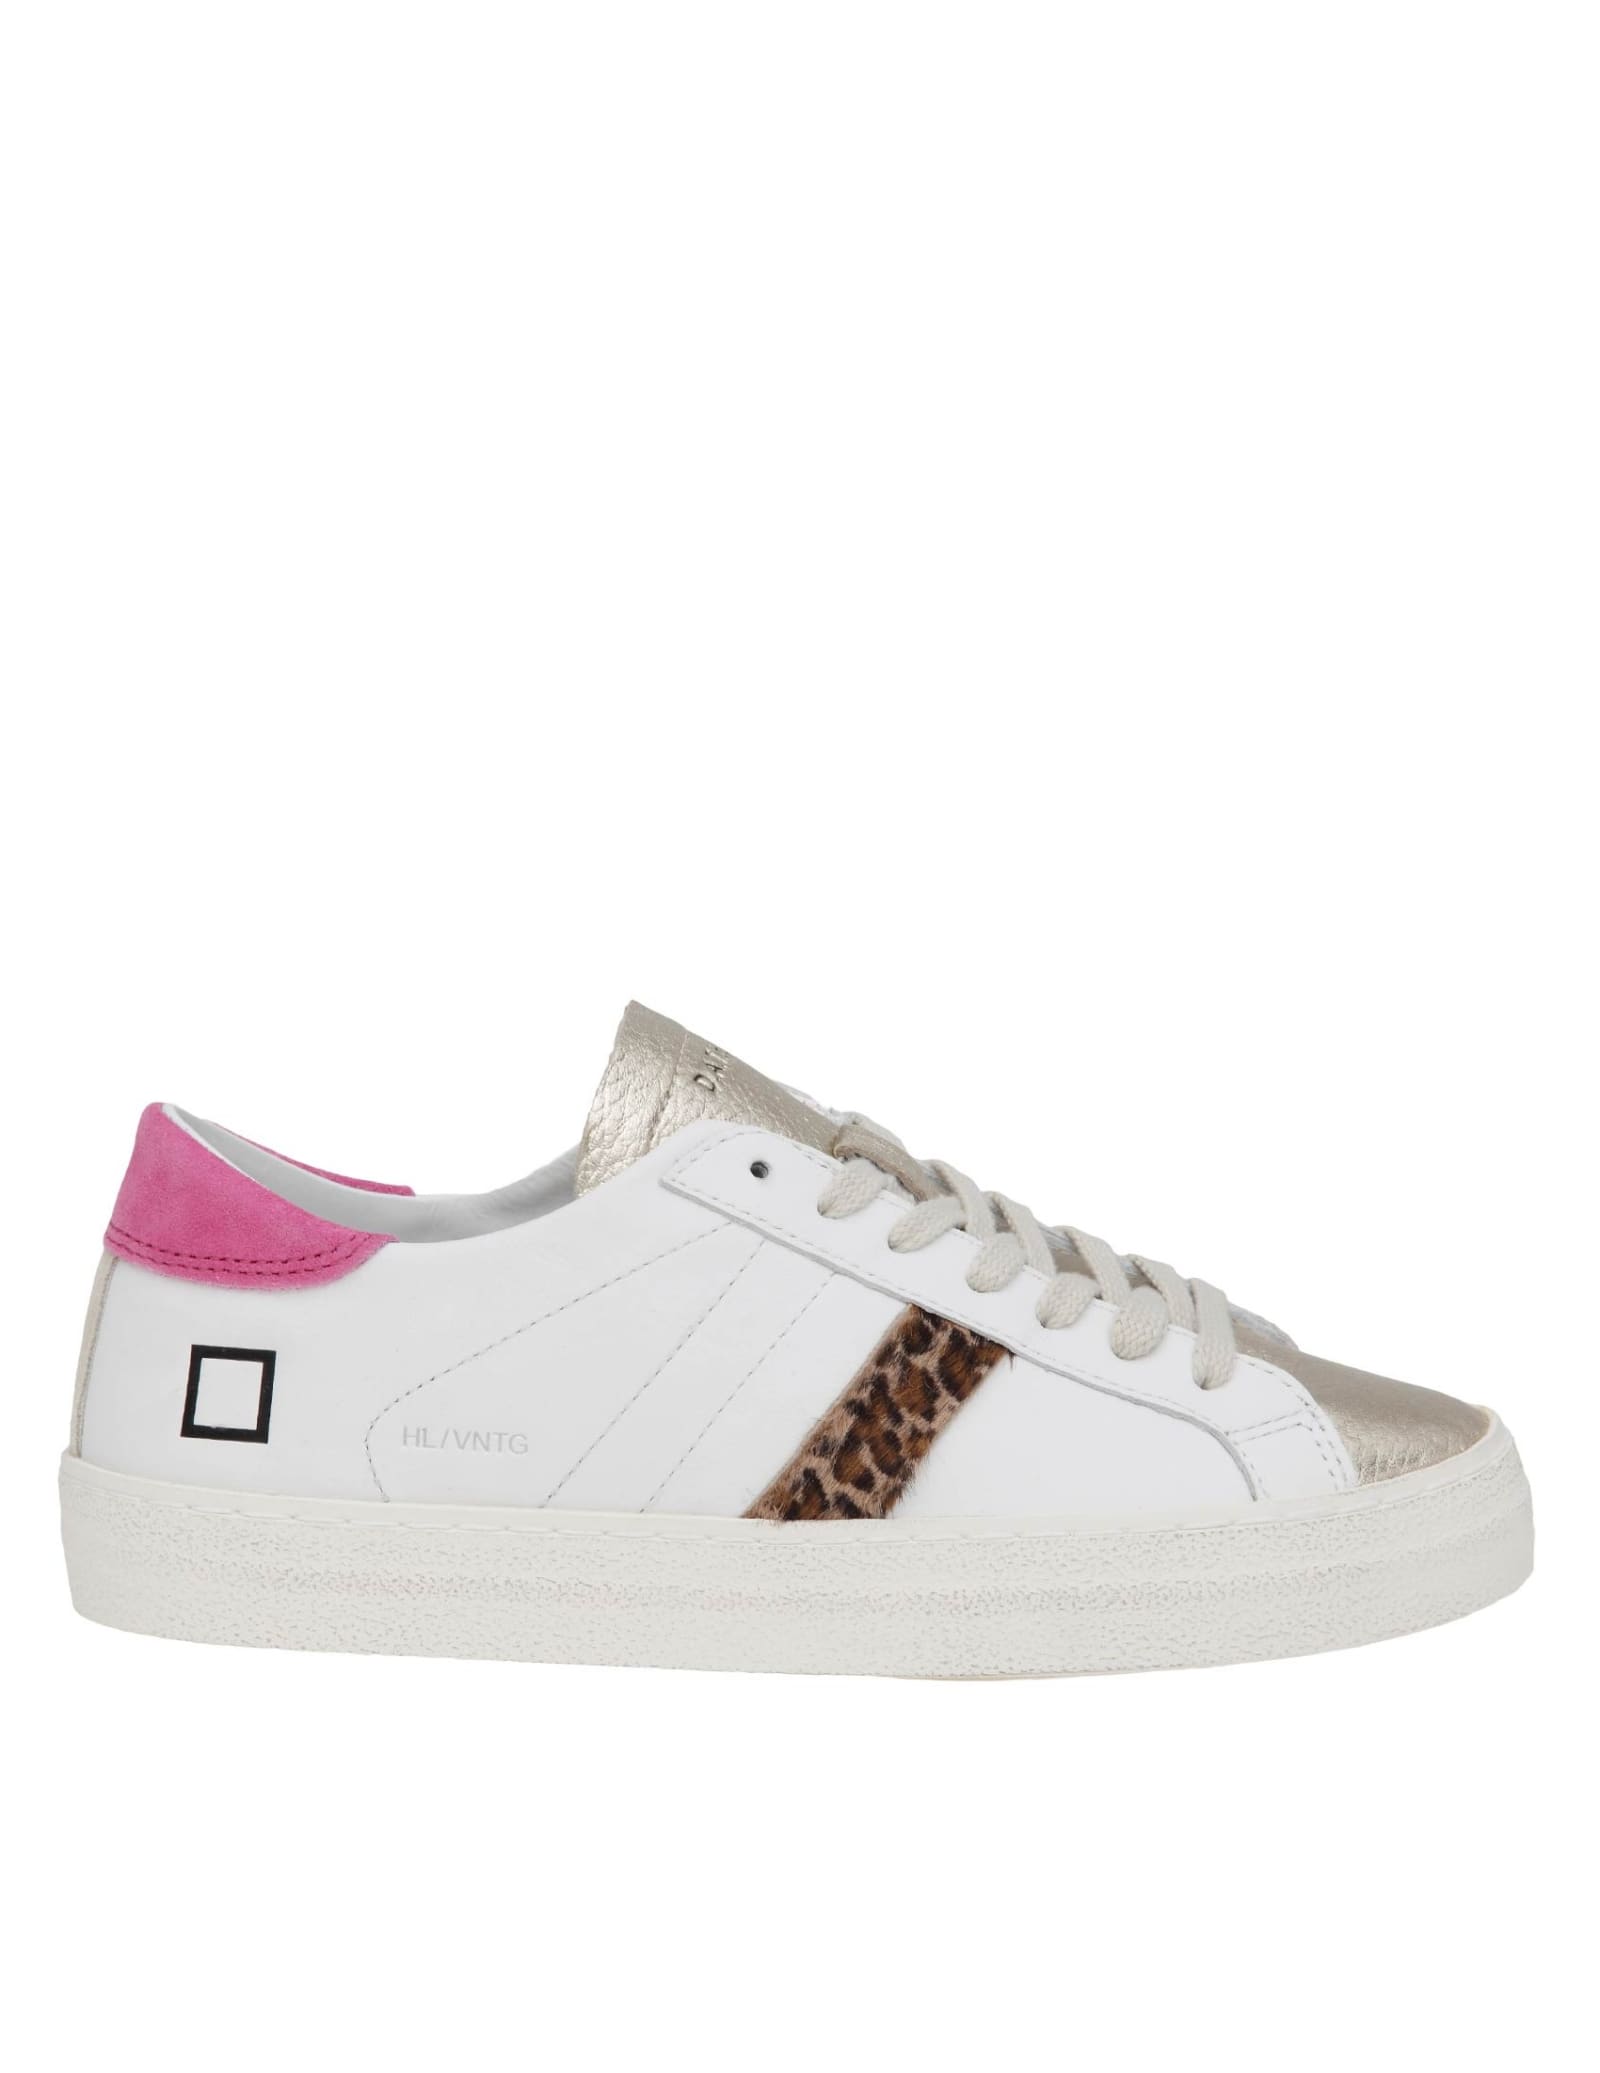 DATE SNEAKERS HILL SNEAKERS IN WHITE/GOLD COLOR LEATHER